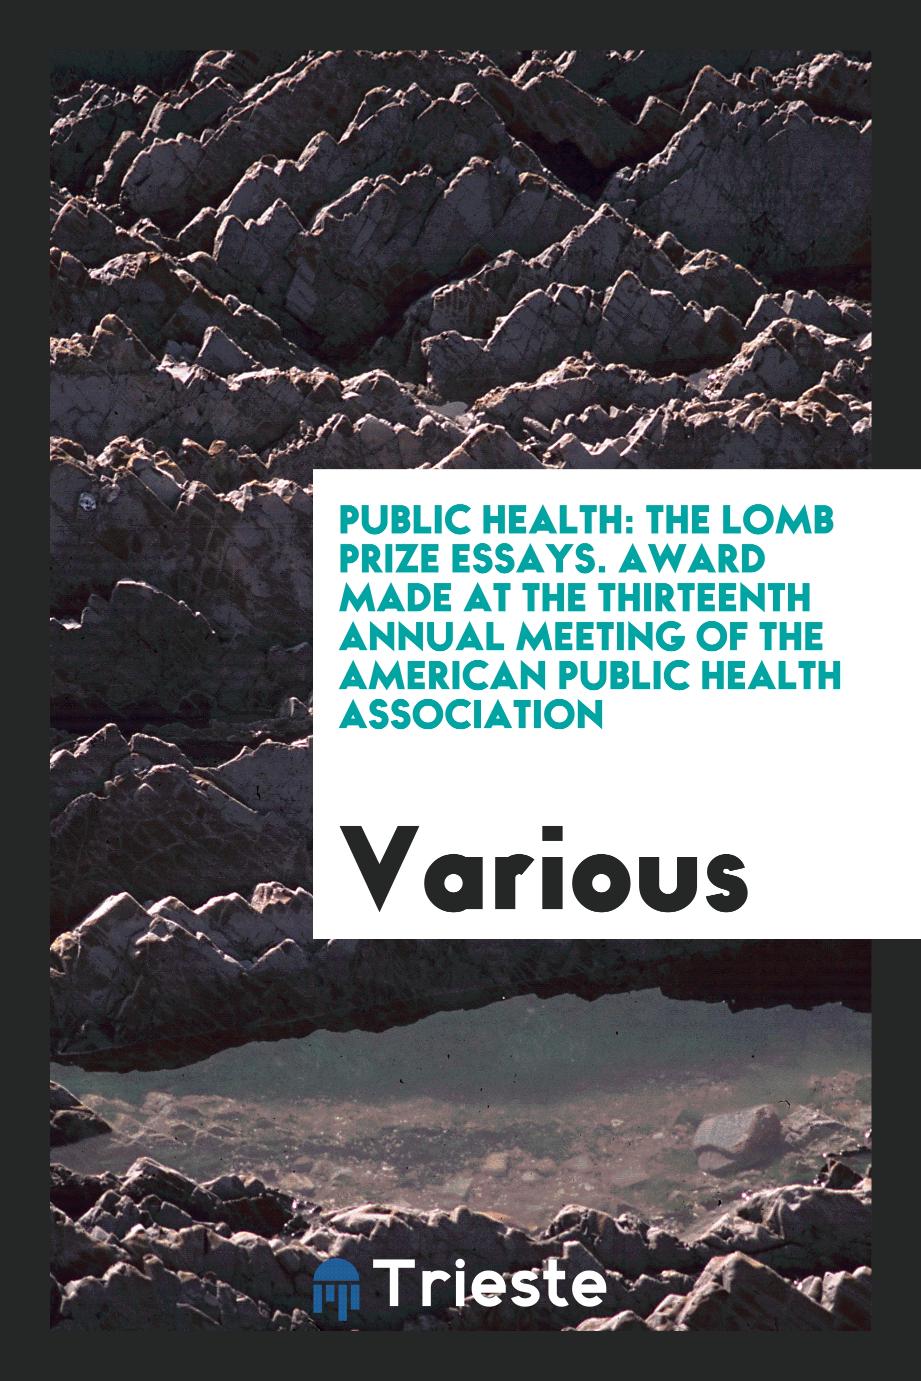 Public Health: The Lomb Prize Essays. Award Made at the Thirteenth Annual Meeting of the American Public Health Association